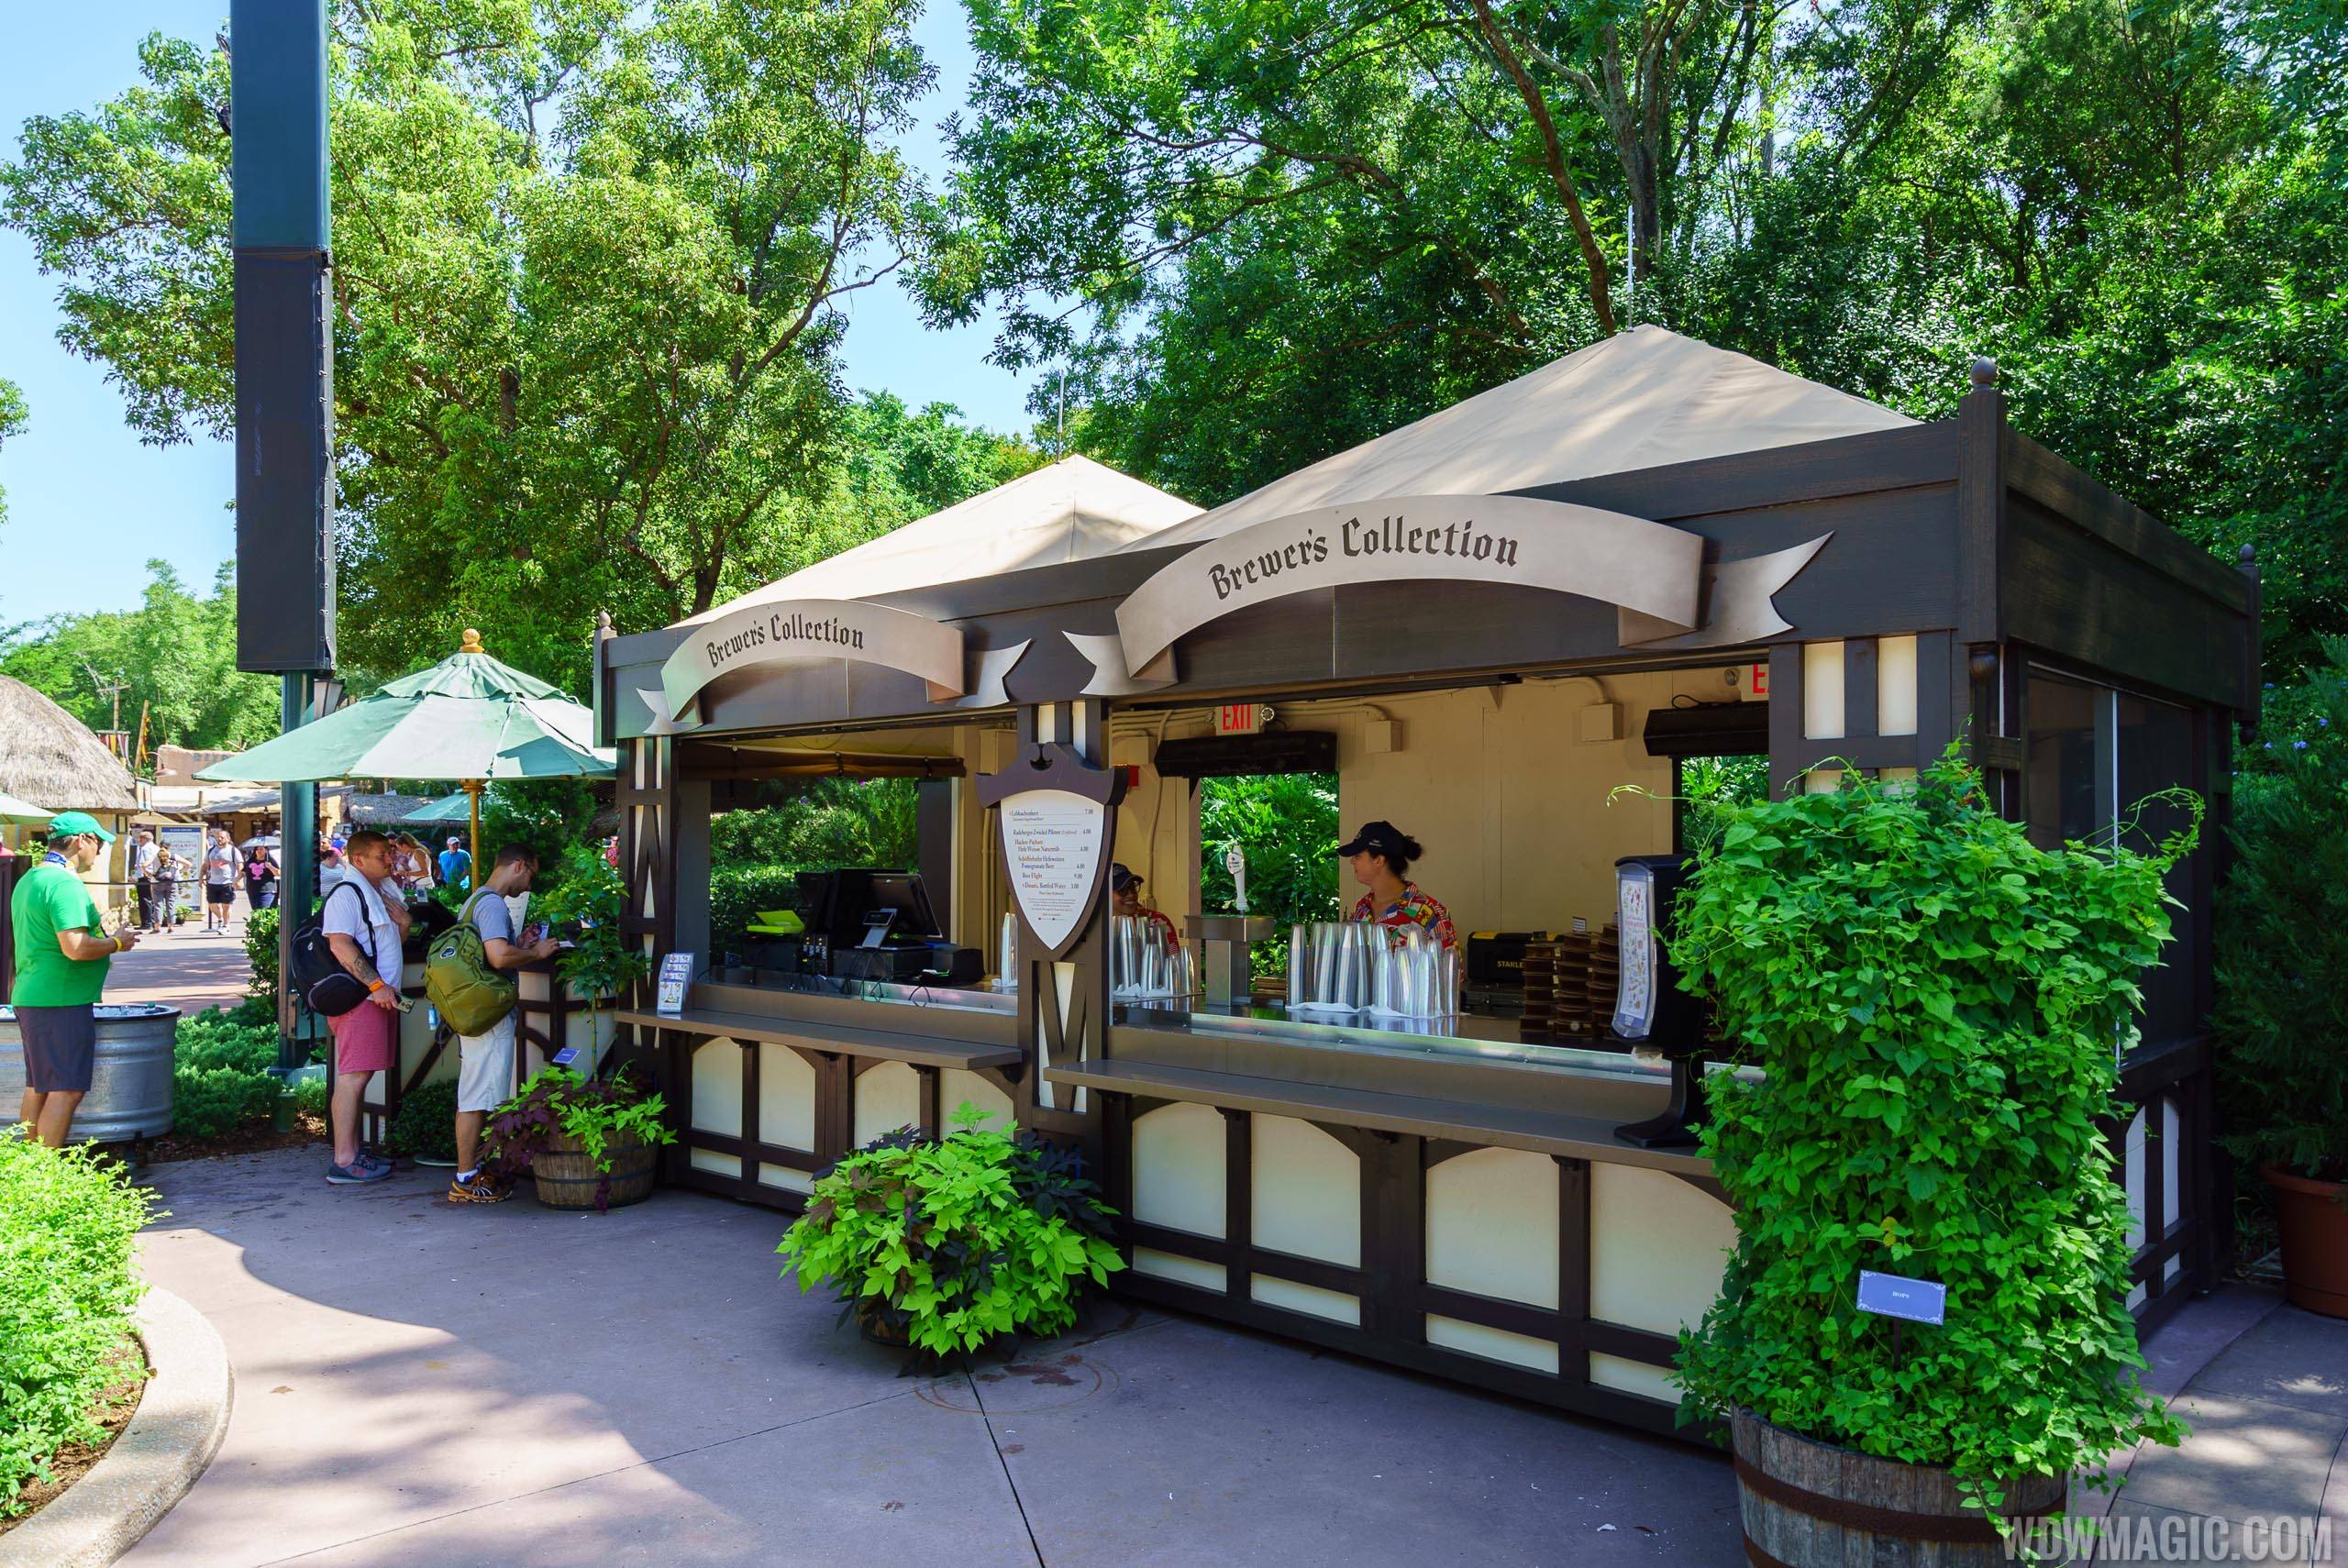 2017 Epcot Food and Wine Festival - Brewer's Collection marketplace kiosk